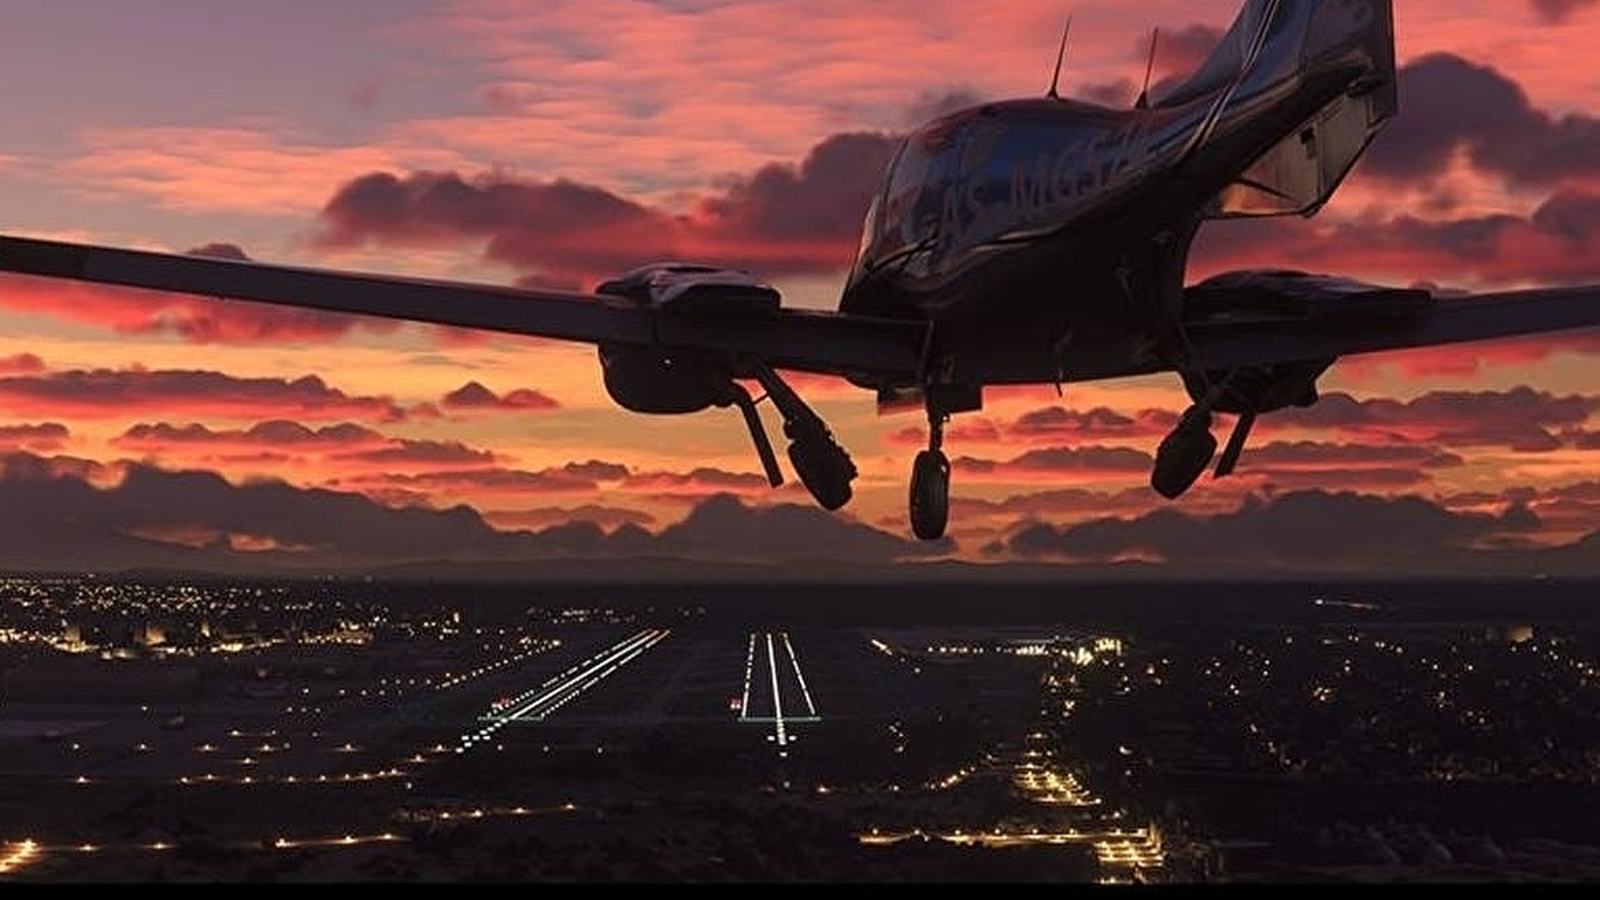 Microsoft Flight Simulator review: clear skies with some light